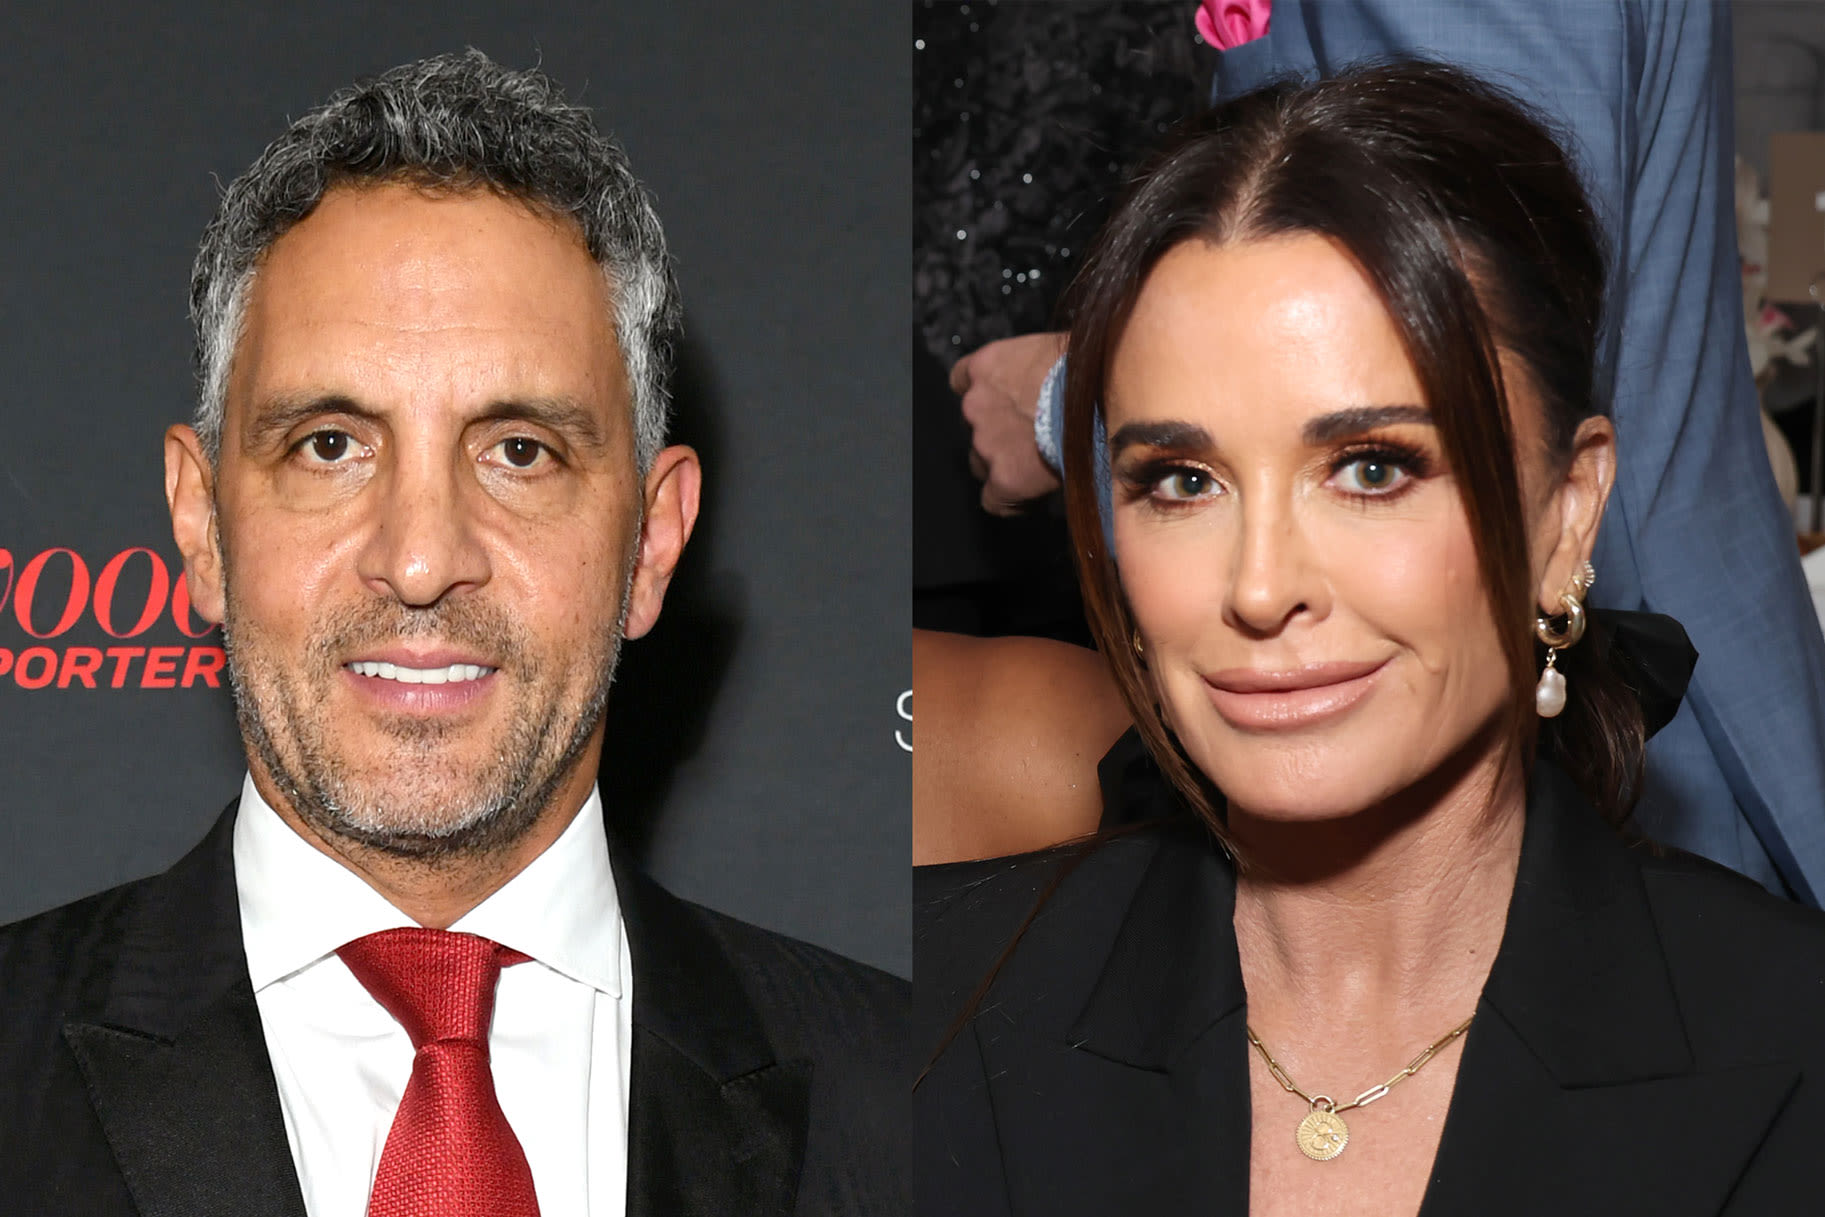 Kyle Richards Opens Up About Mauricio Umansky Moving Out: "Very Real All of a Sudden" | Bravo TV Official Site